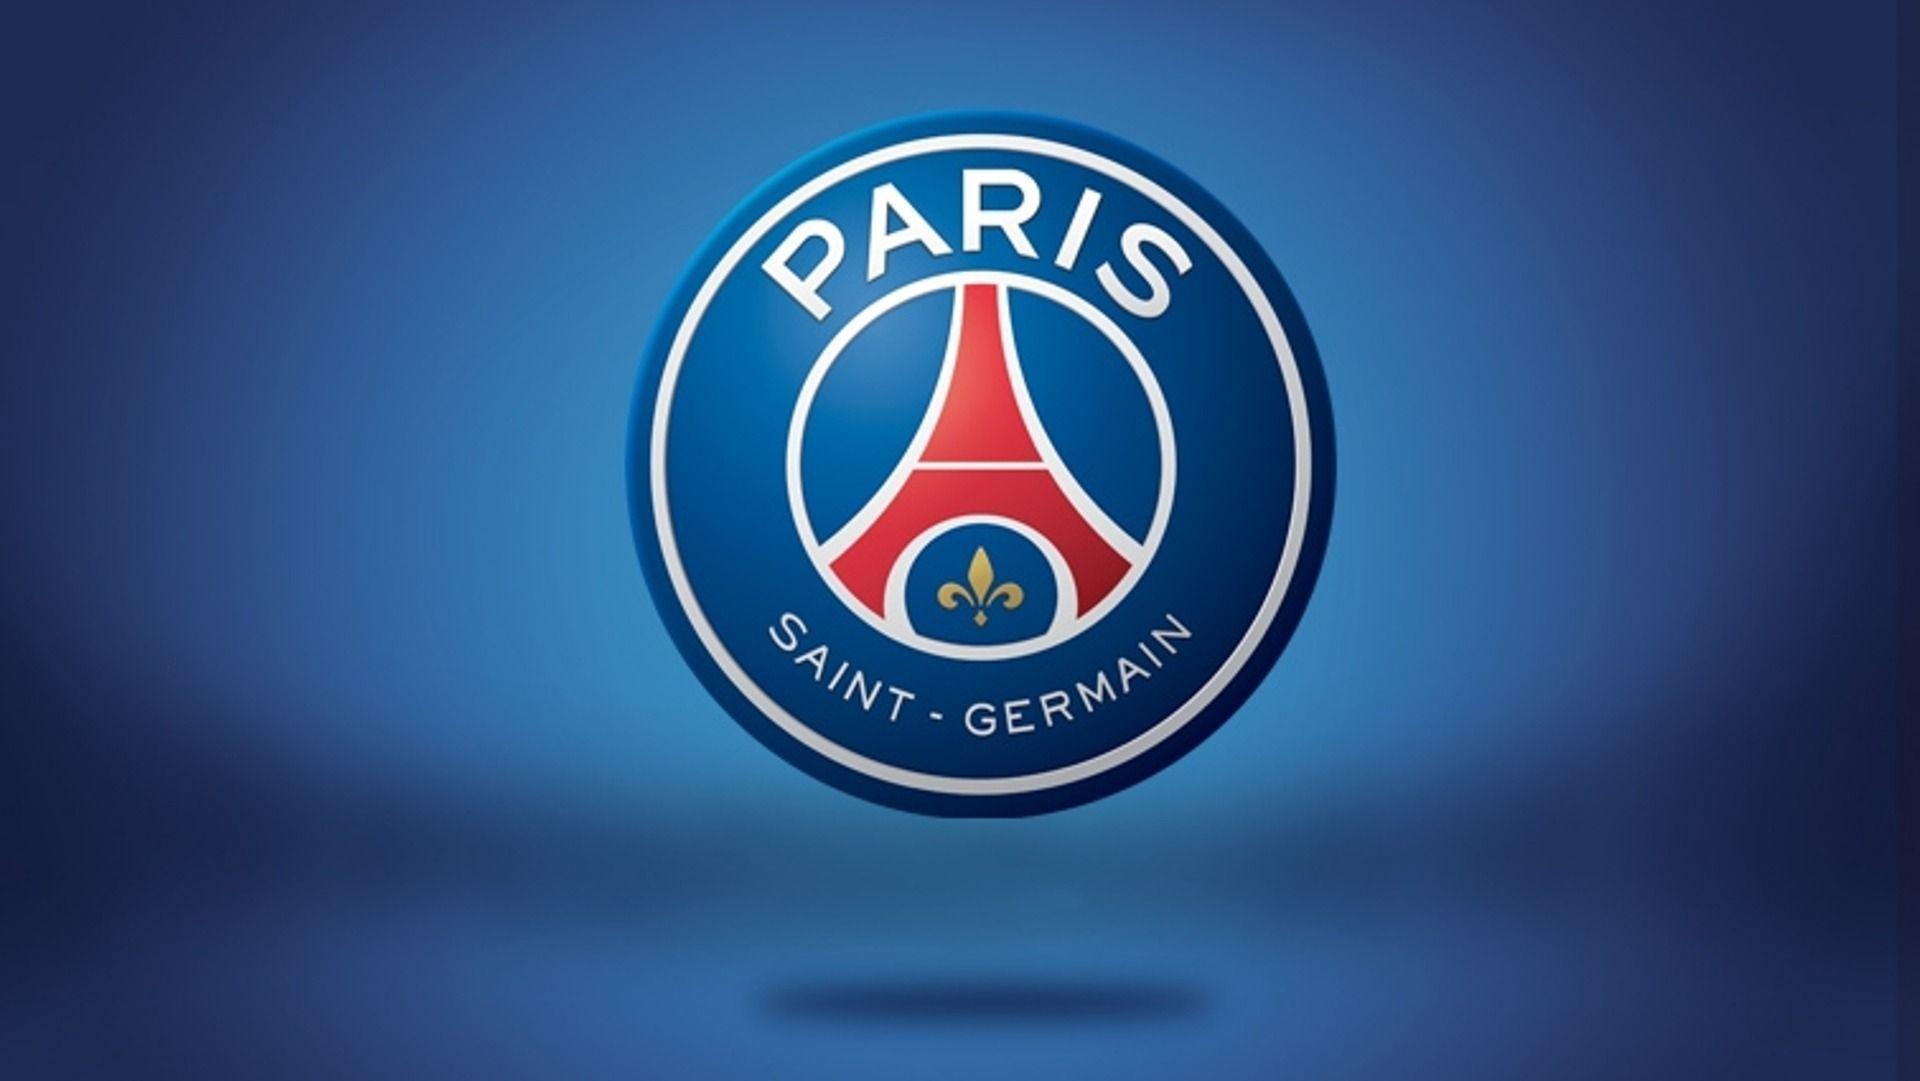 Paris Saint Germain Wallpapers - Wallpaper - #1 Source for free Awesome ...